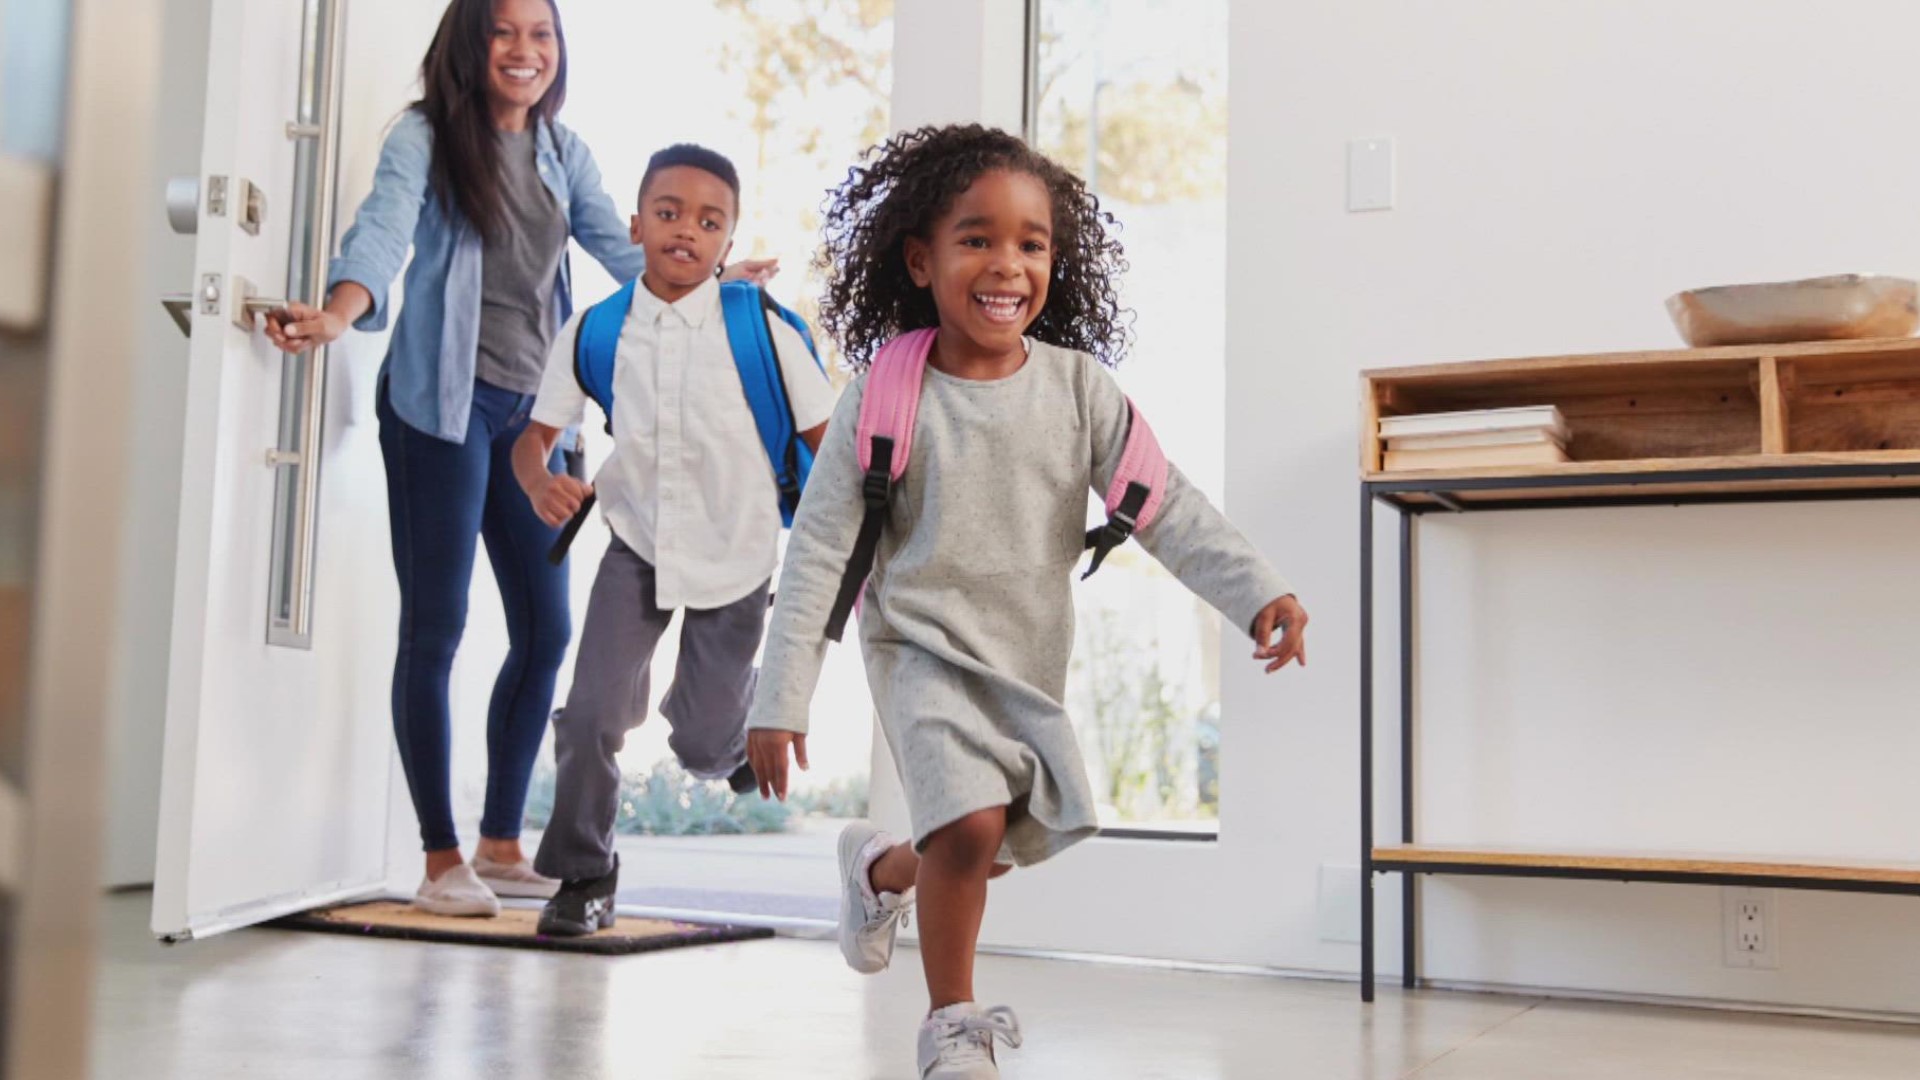 WTHR Education expert Jennifer Brinker shares advice for what parents can do to help children be prepared for the transition to the first day at a new school.